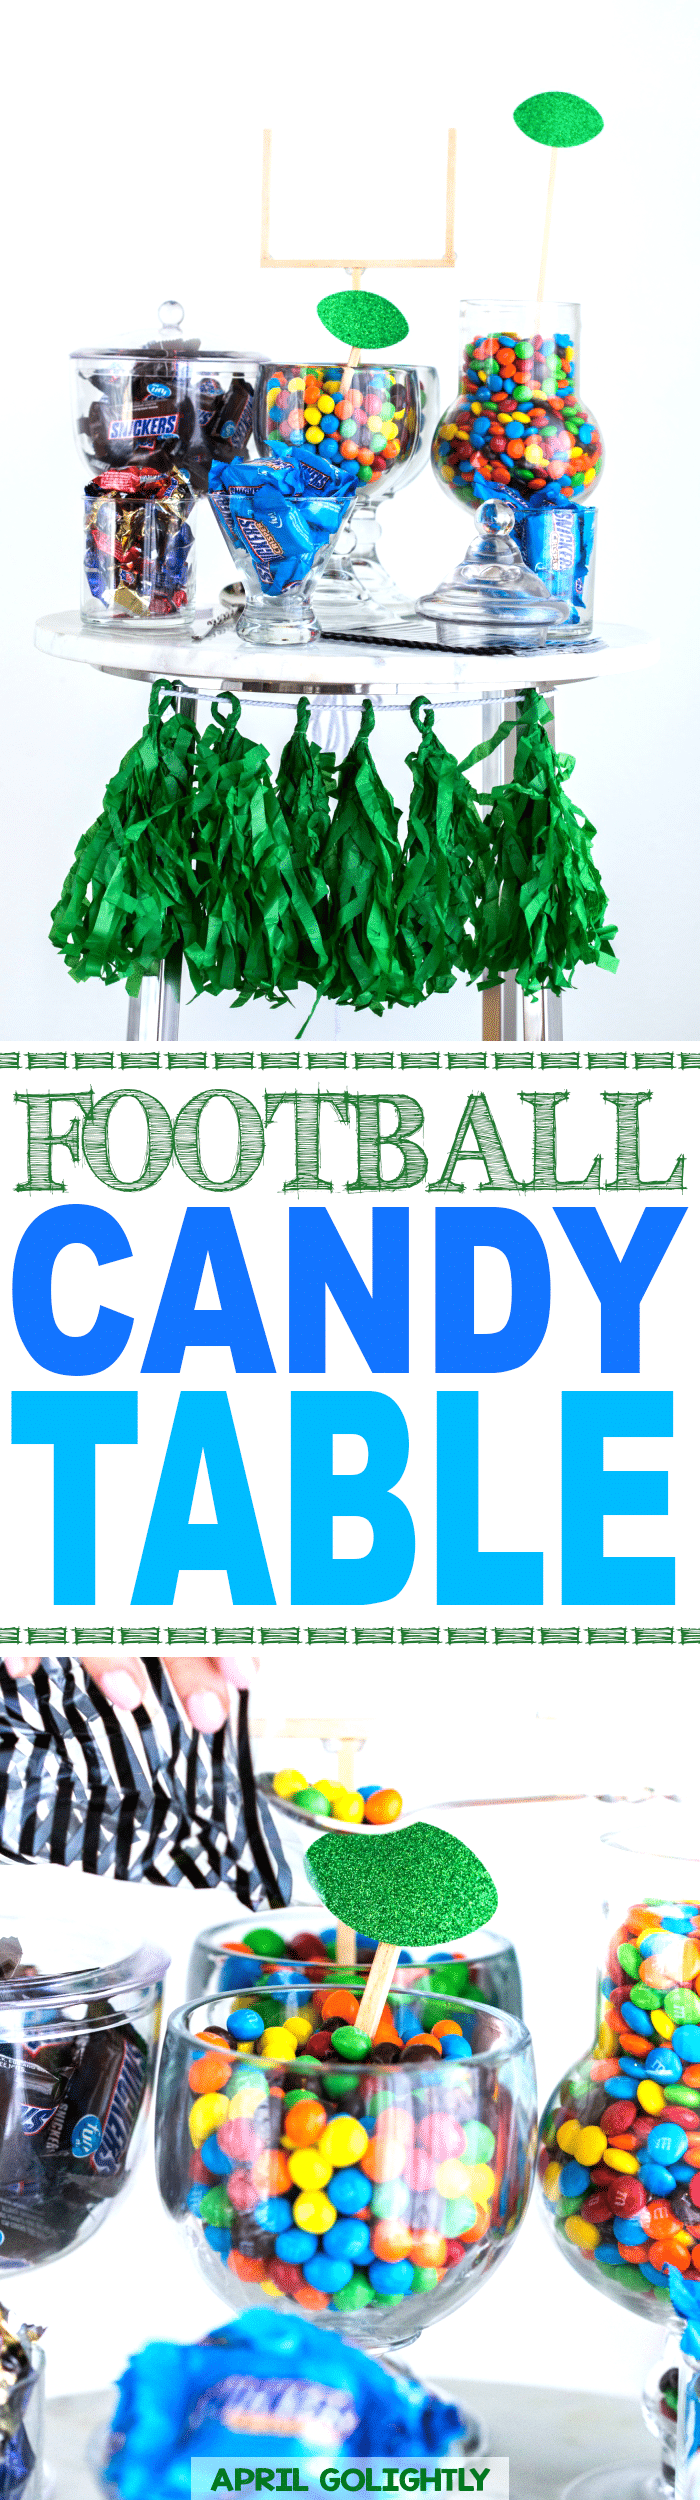 Football Party Candle Table for your sweet tooth and football loving guests and your next tailgate party